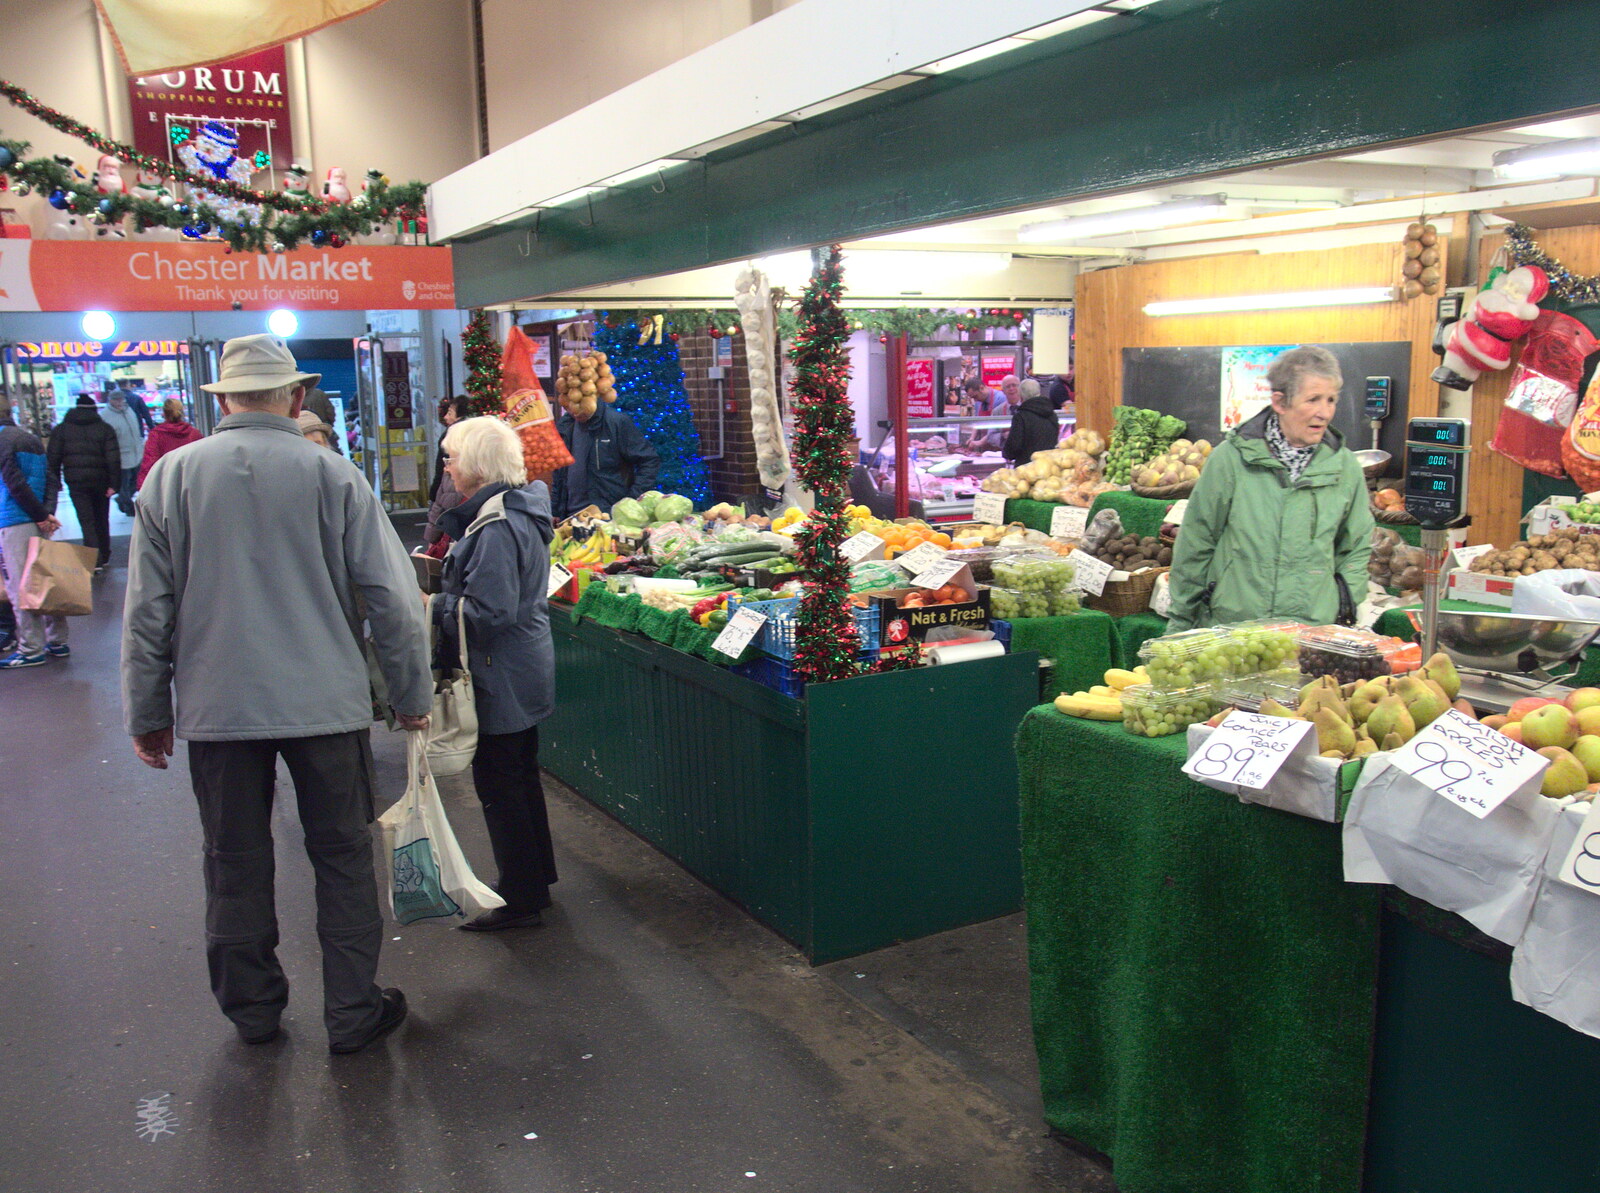 Fruit and Veg stalls in Chester market from A Party and a Road Trip to Chester, Suffolk and Cheshire - 20th December 2015